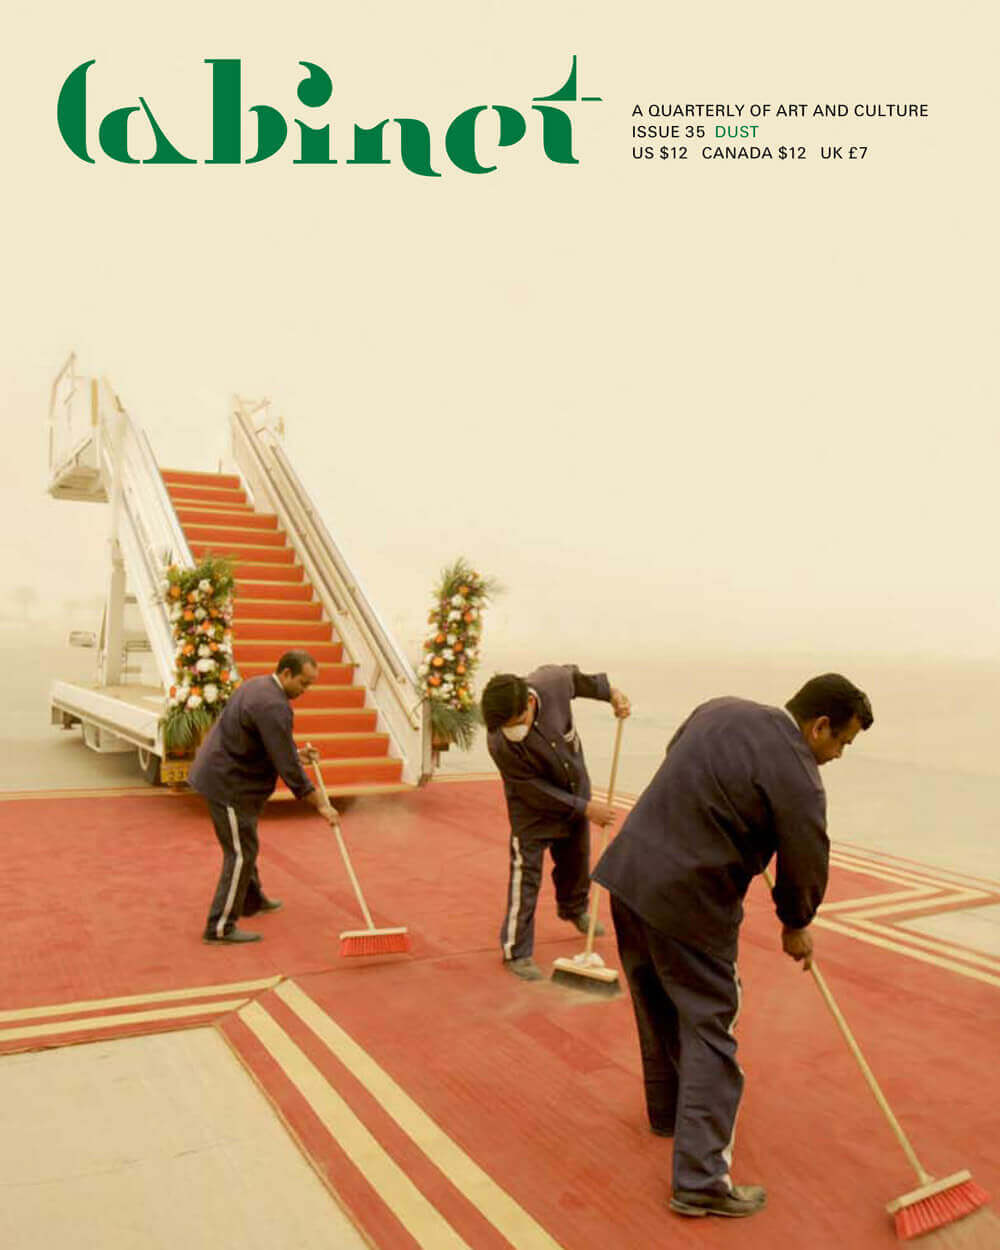 A 2009 image of Kuwait International Airport employees sweeping the red carpet during a sandstorm in preparation for the arrival of French president Nicolas Sarkozy.